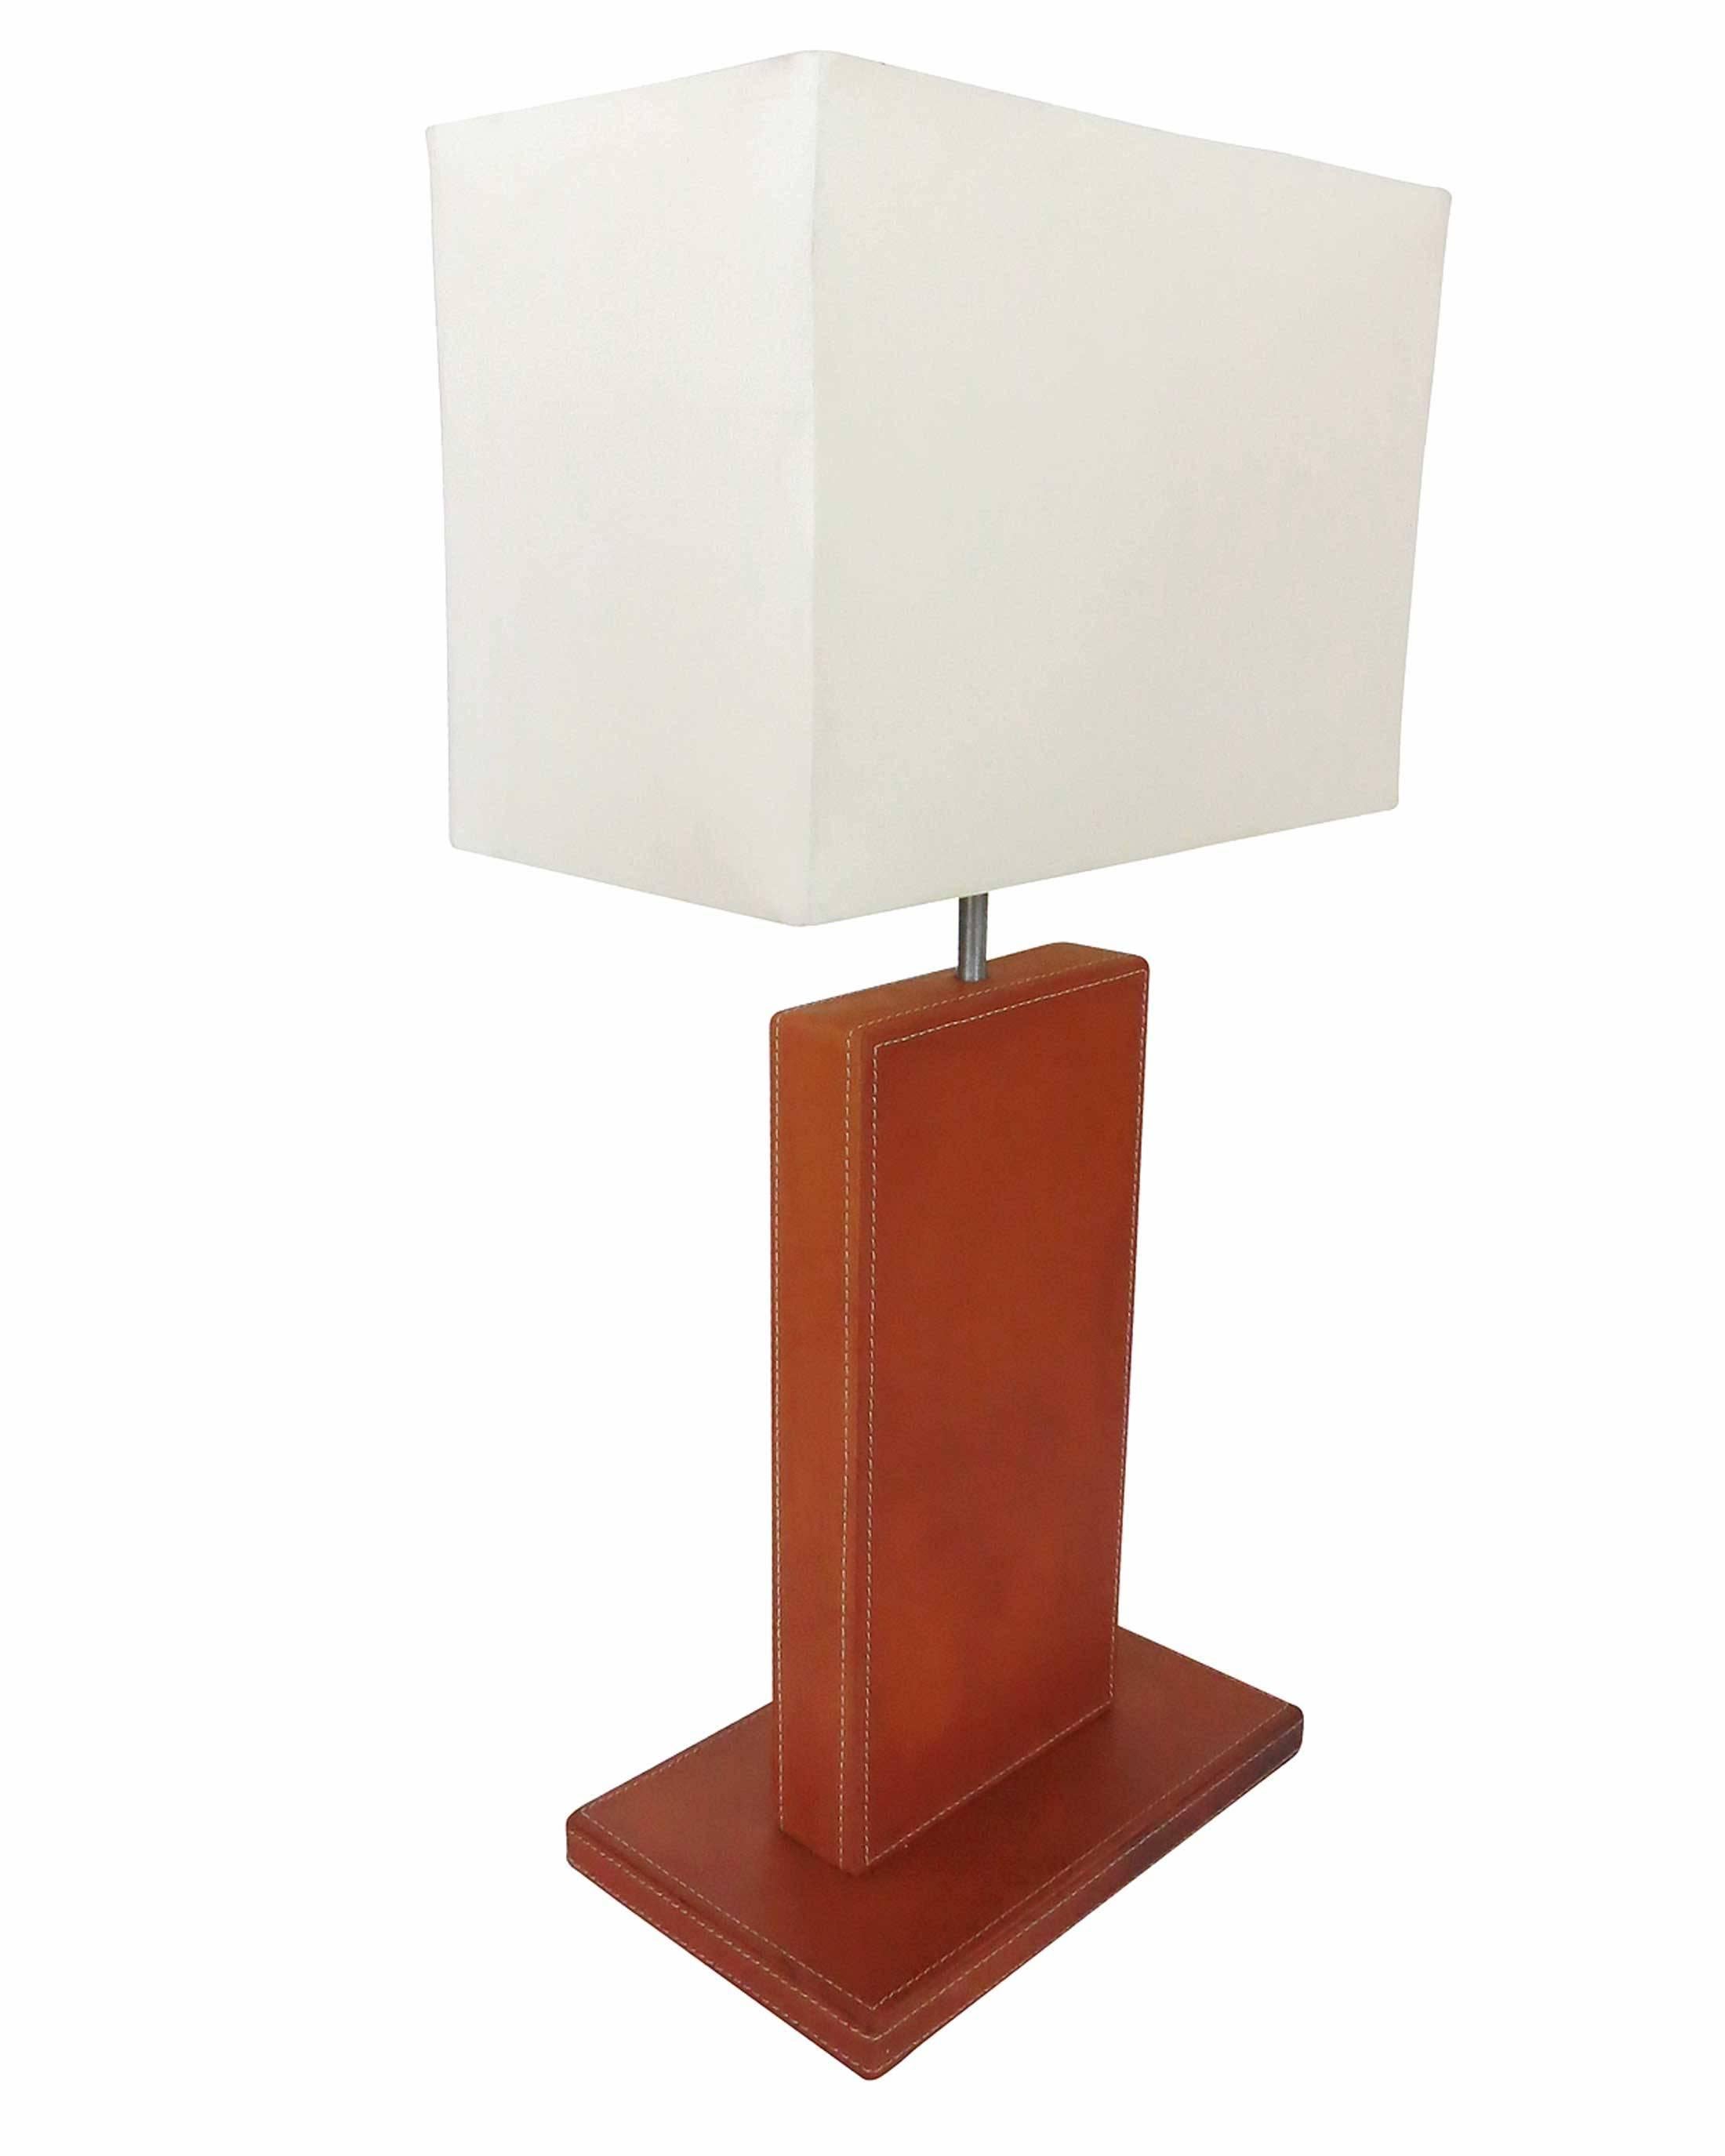 Striking Jacques Adnet style table lamp with handstitched leather base. 

Comes with square white lamp shade. 

Attributed to Jacques Adnet for Herme`s. Unsigned

Shade is 12